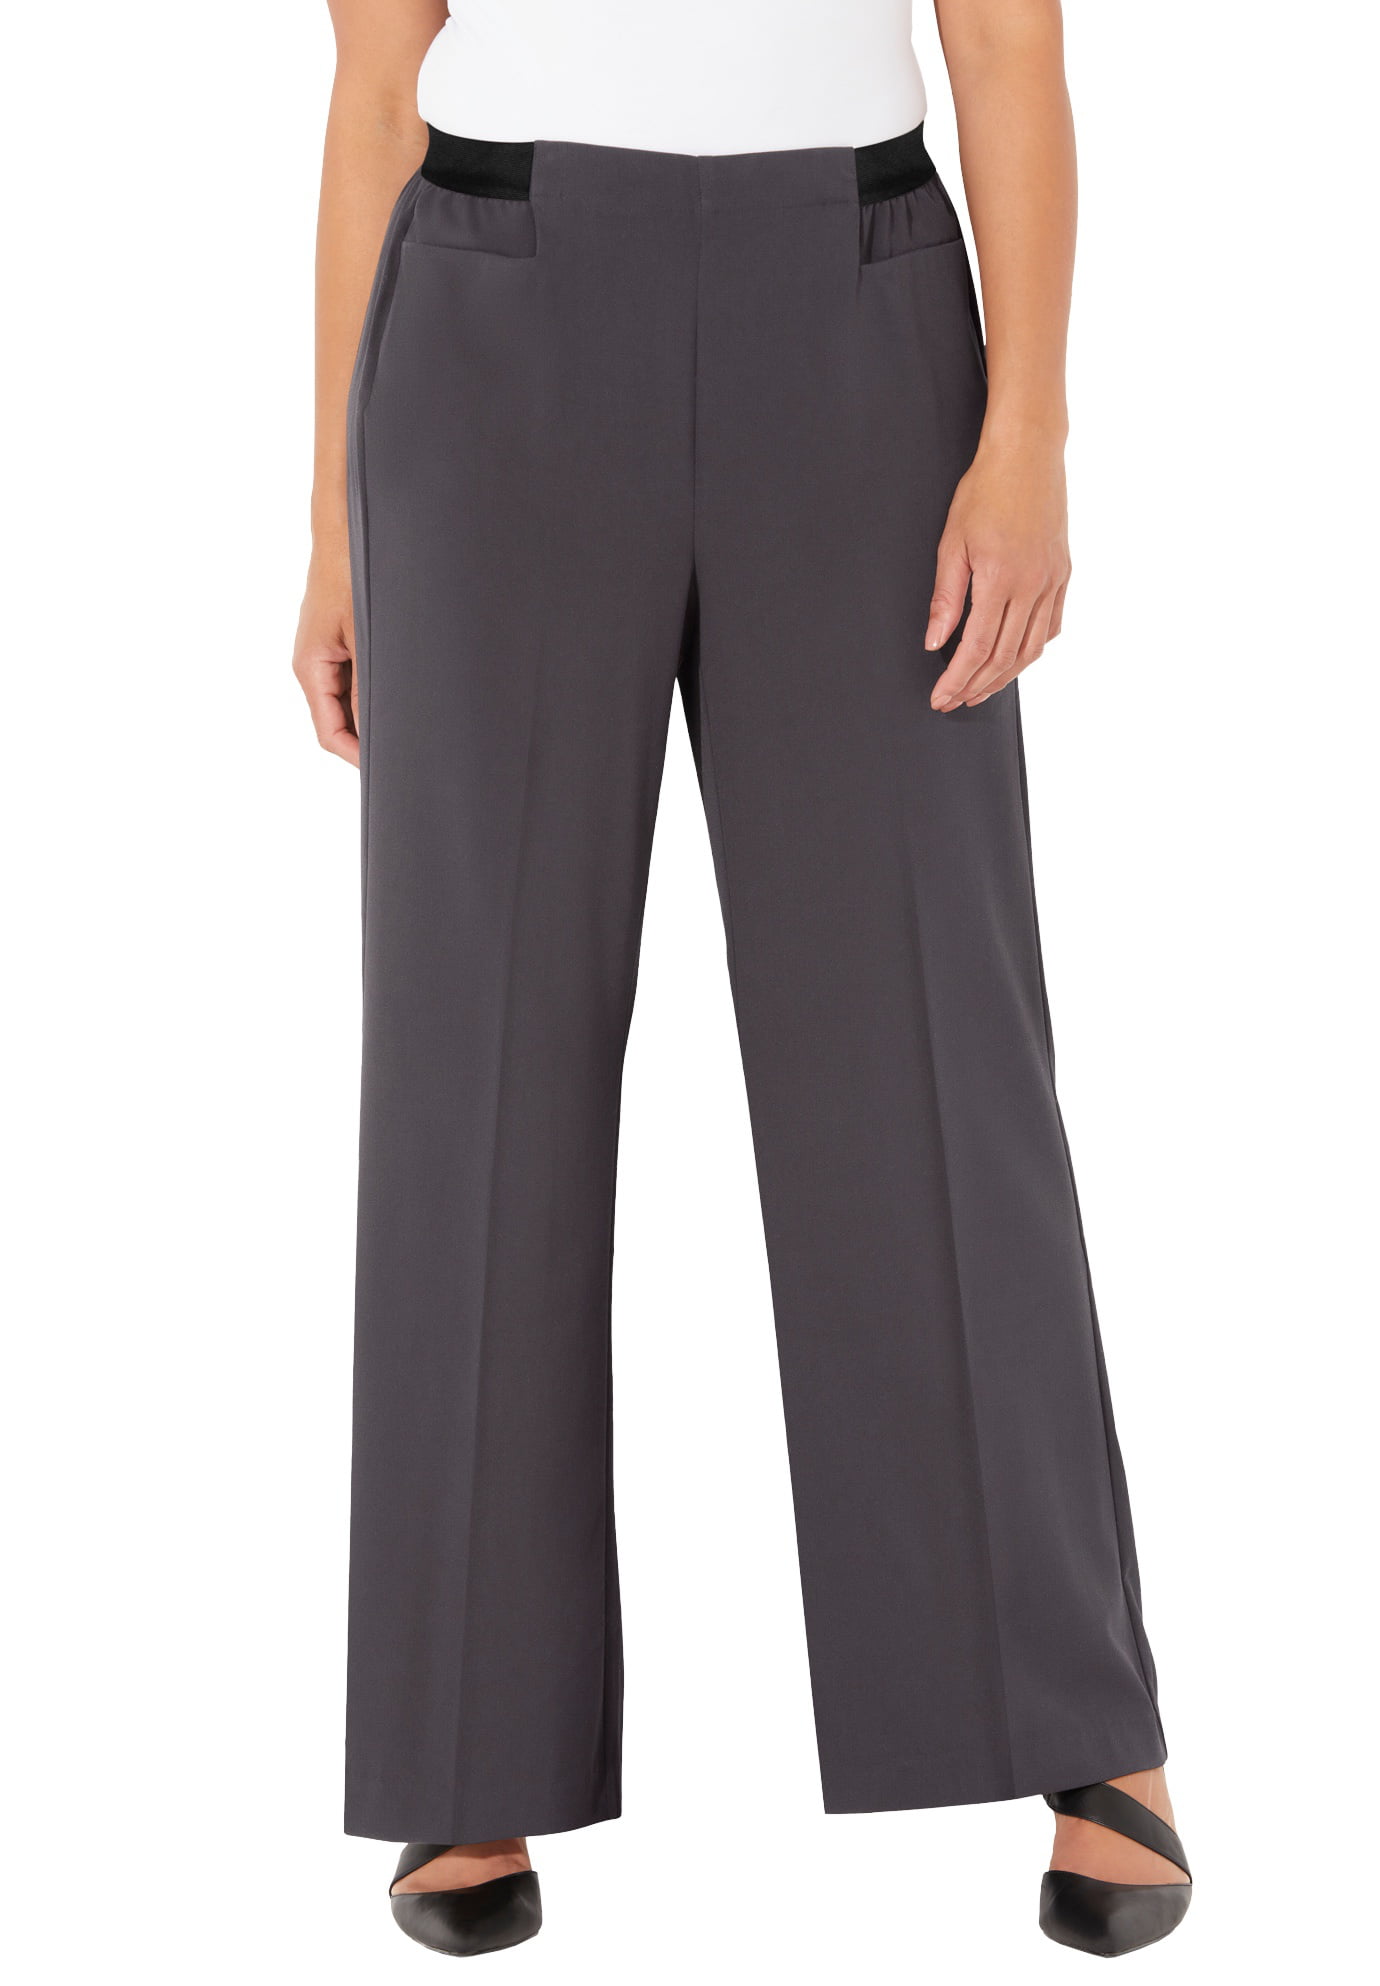 Catherines Women's Plus Size Refined Pull-On Wide-Leg Pant - Walmart.com